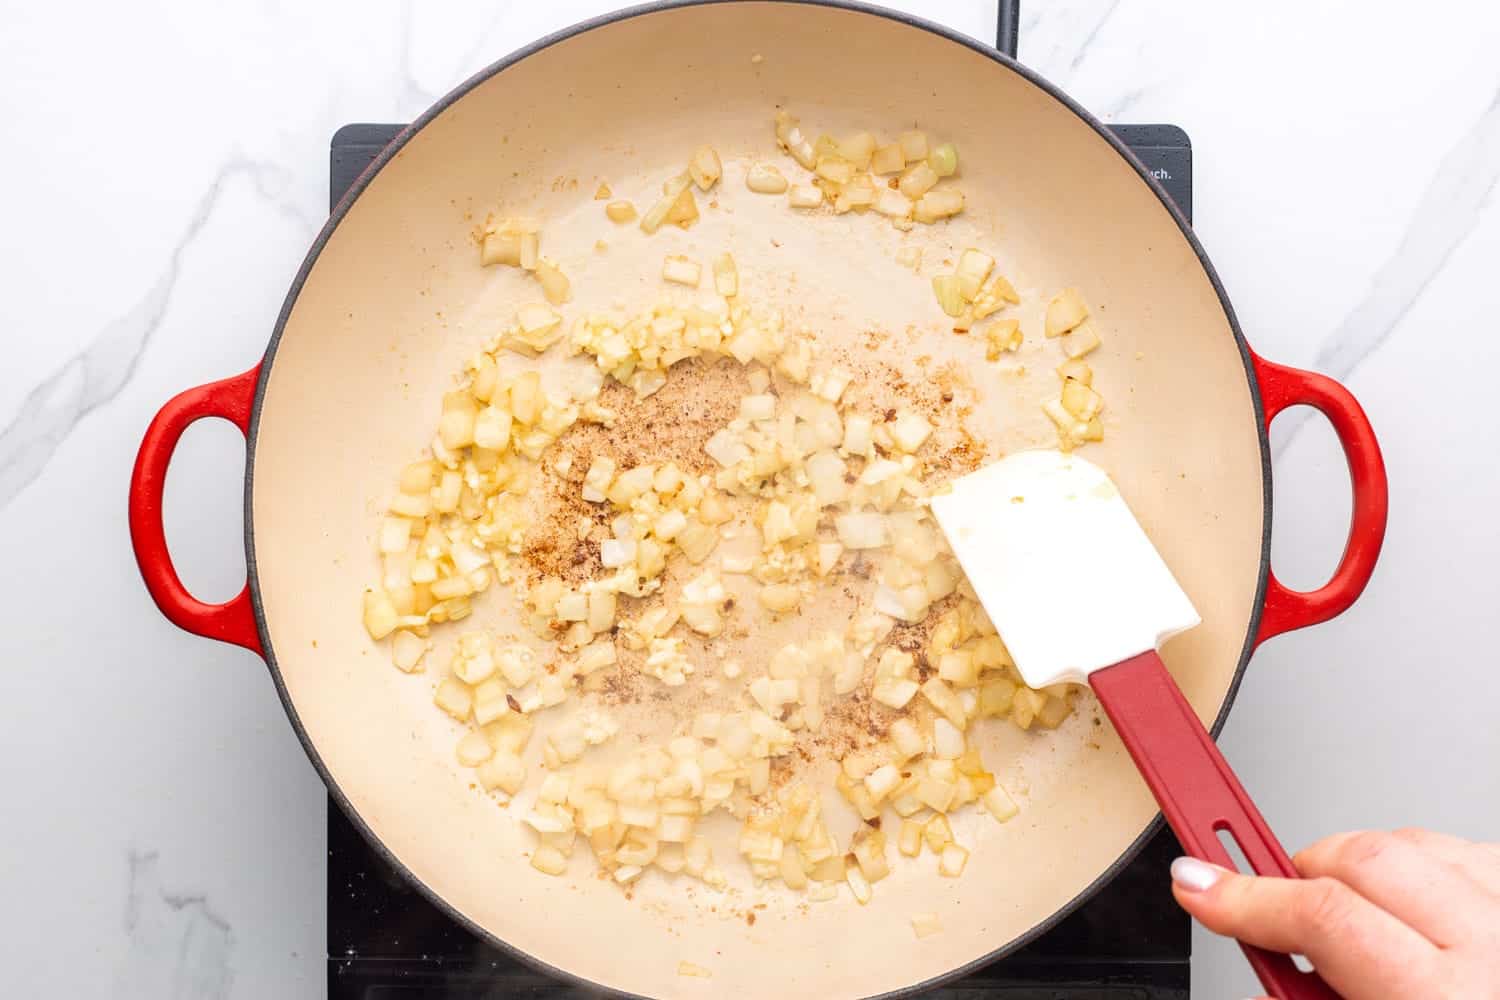 overhead view of diced onion and garlic cooking in an enamel coated skillet, stirred with a red and white spatula.